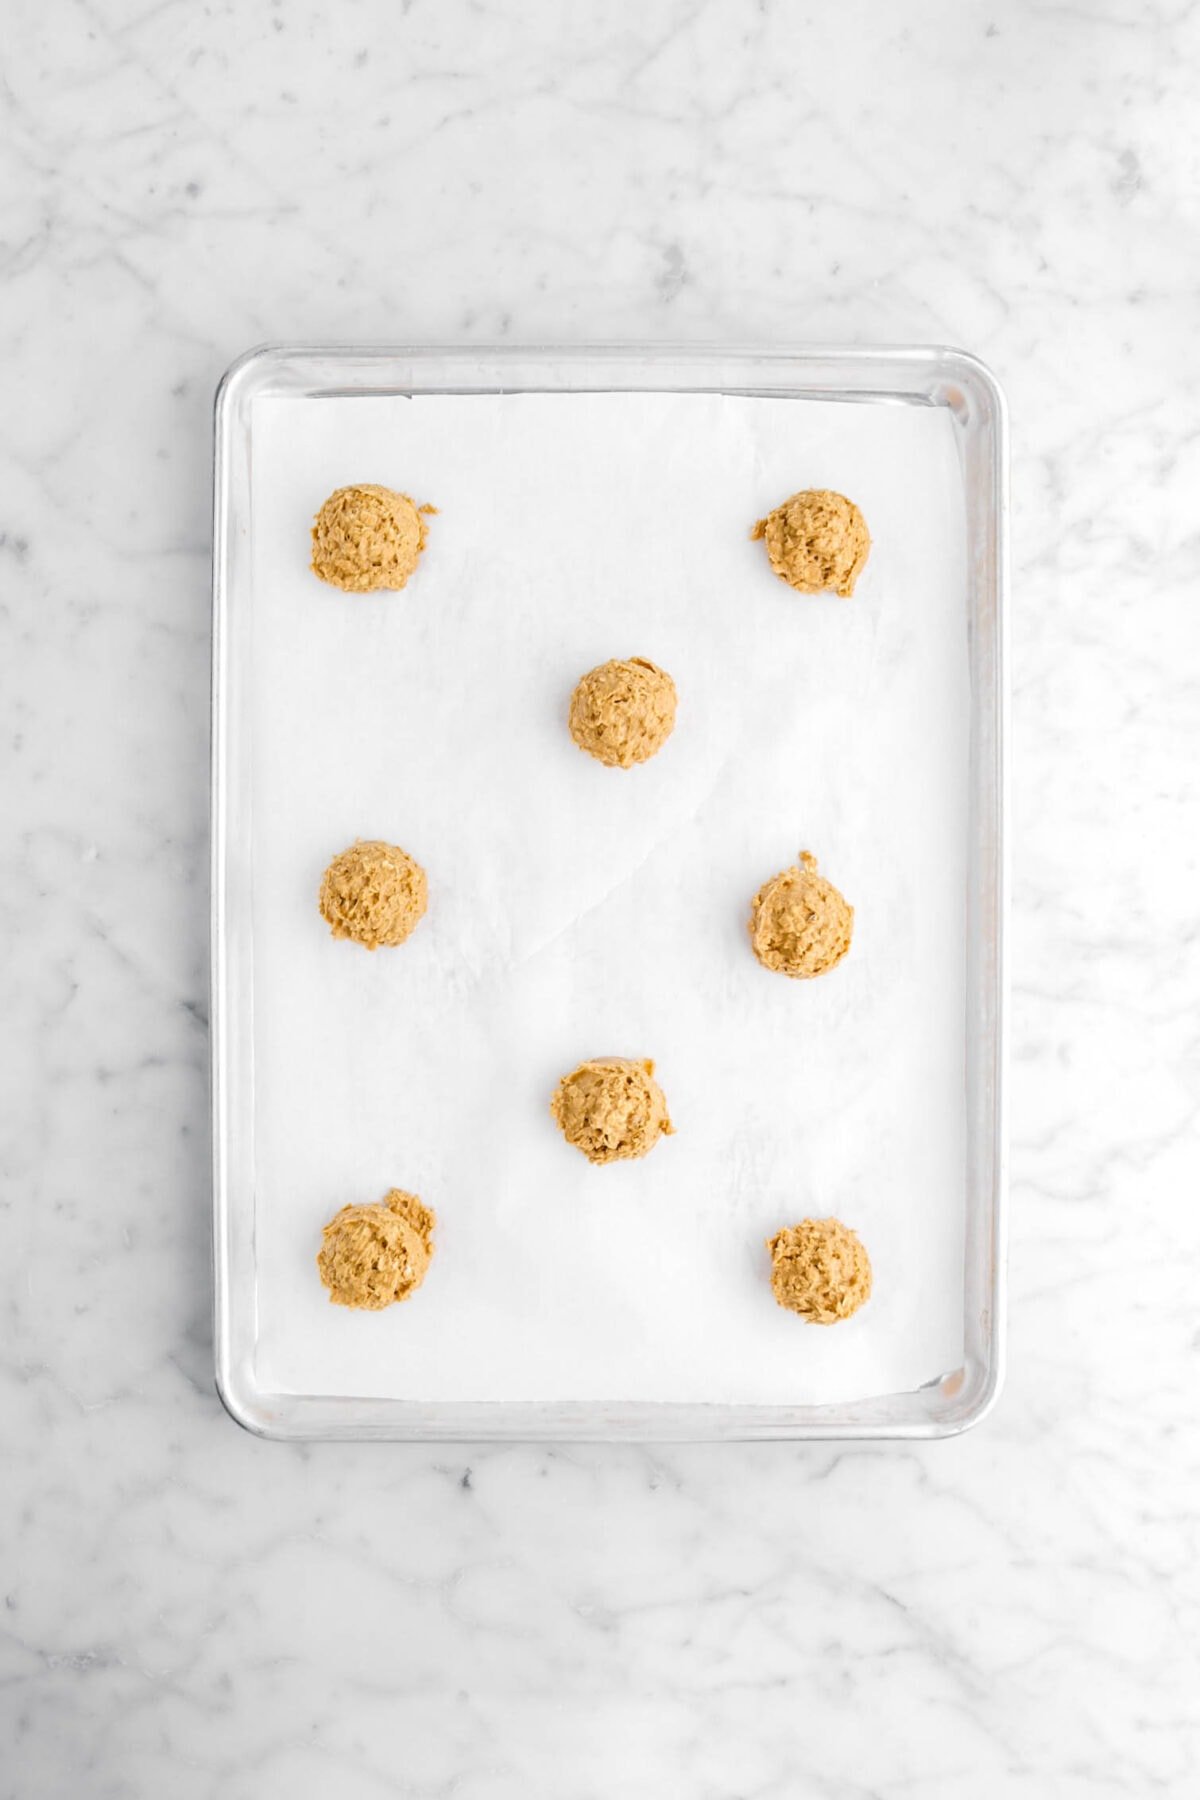 eight cookie dough balls on lined sheet pan.